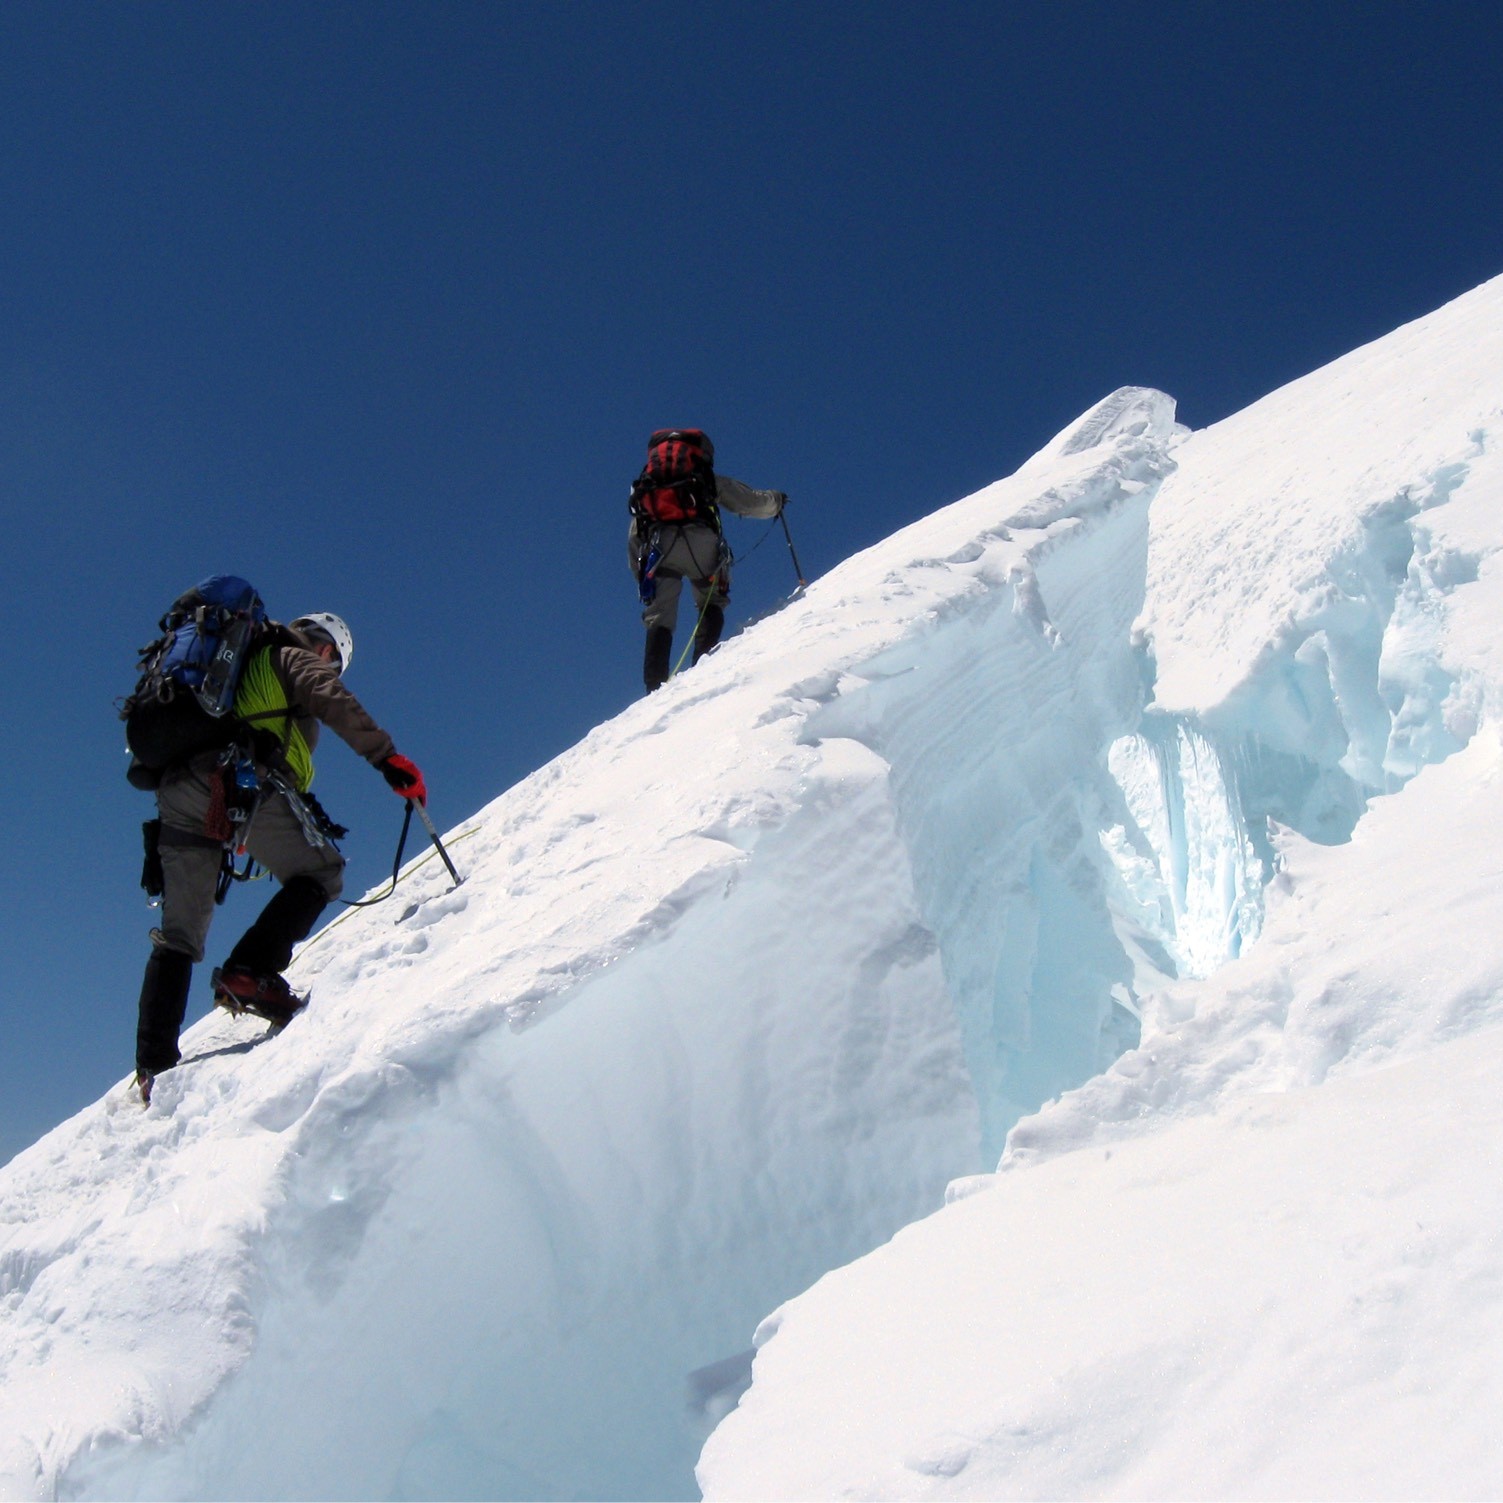 Mountain climbers ascending a steep, snow-covered slope.